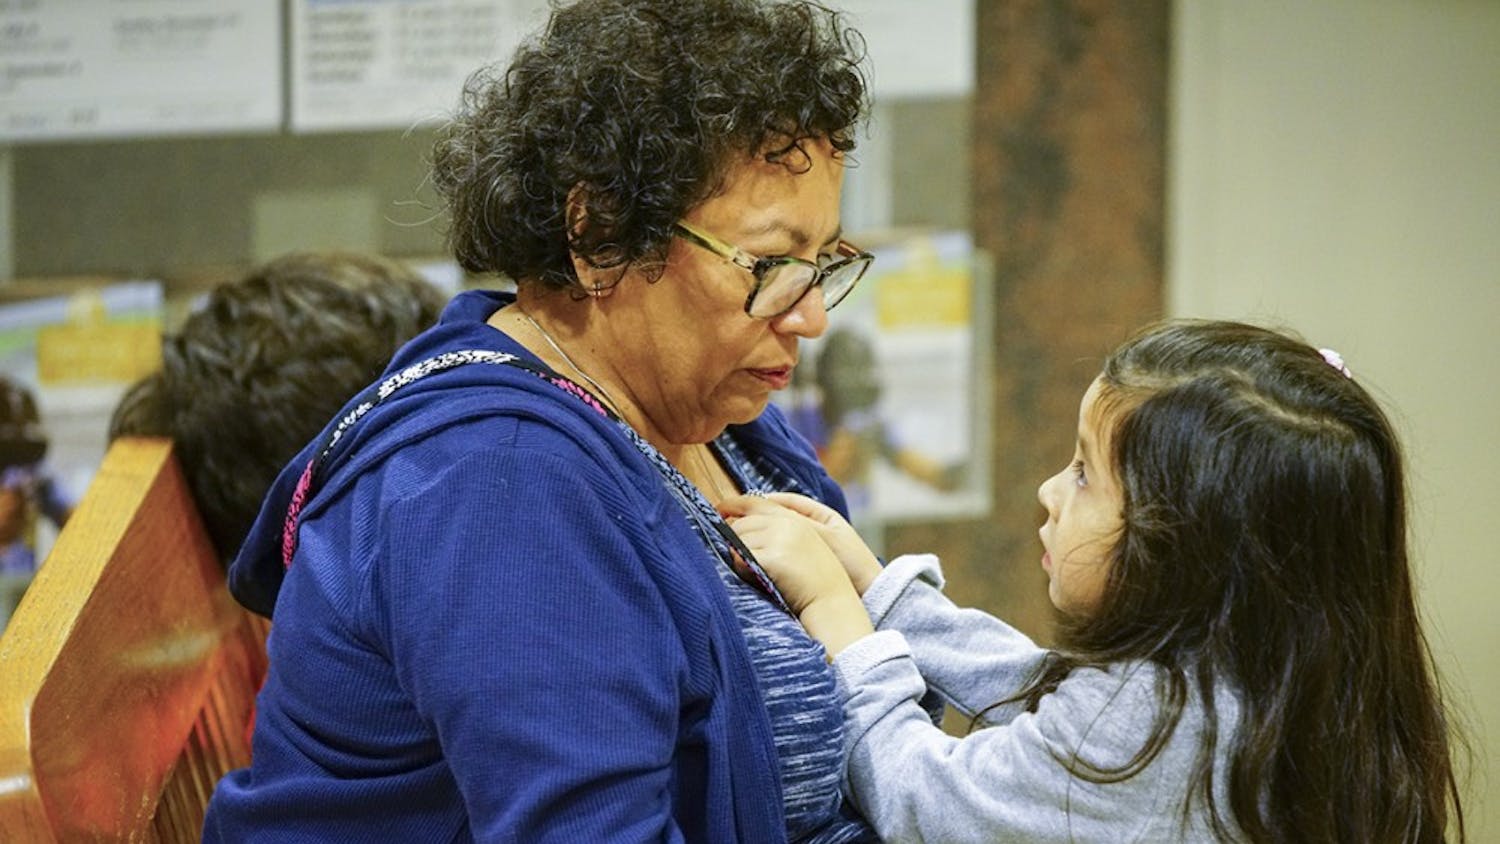 Elosia plays with her grandmother Rochelle Martin’s necklace during the Hispanic Heritage Day Celebration on Sunday afternoon in the Monroe County Public Library.&nbsp;